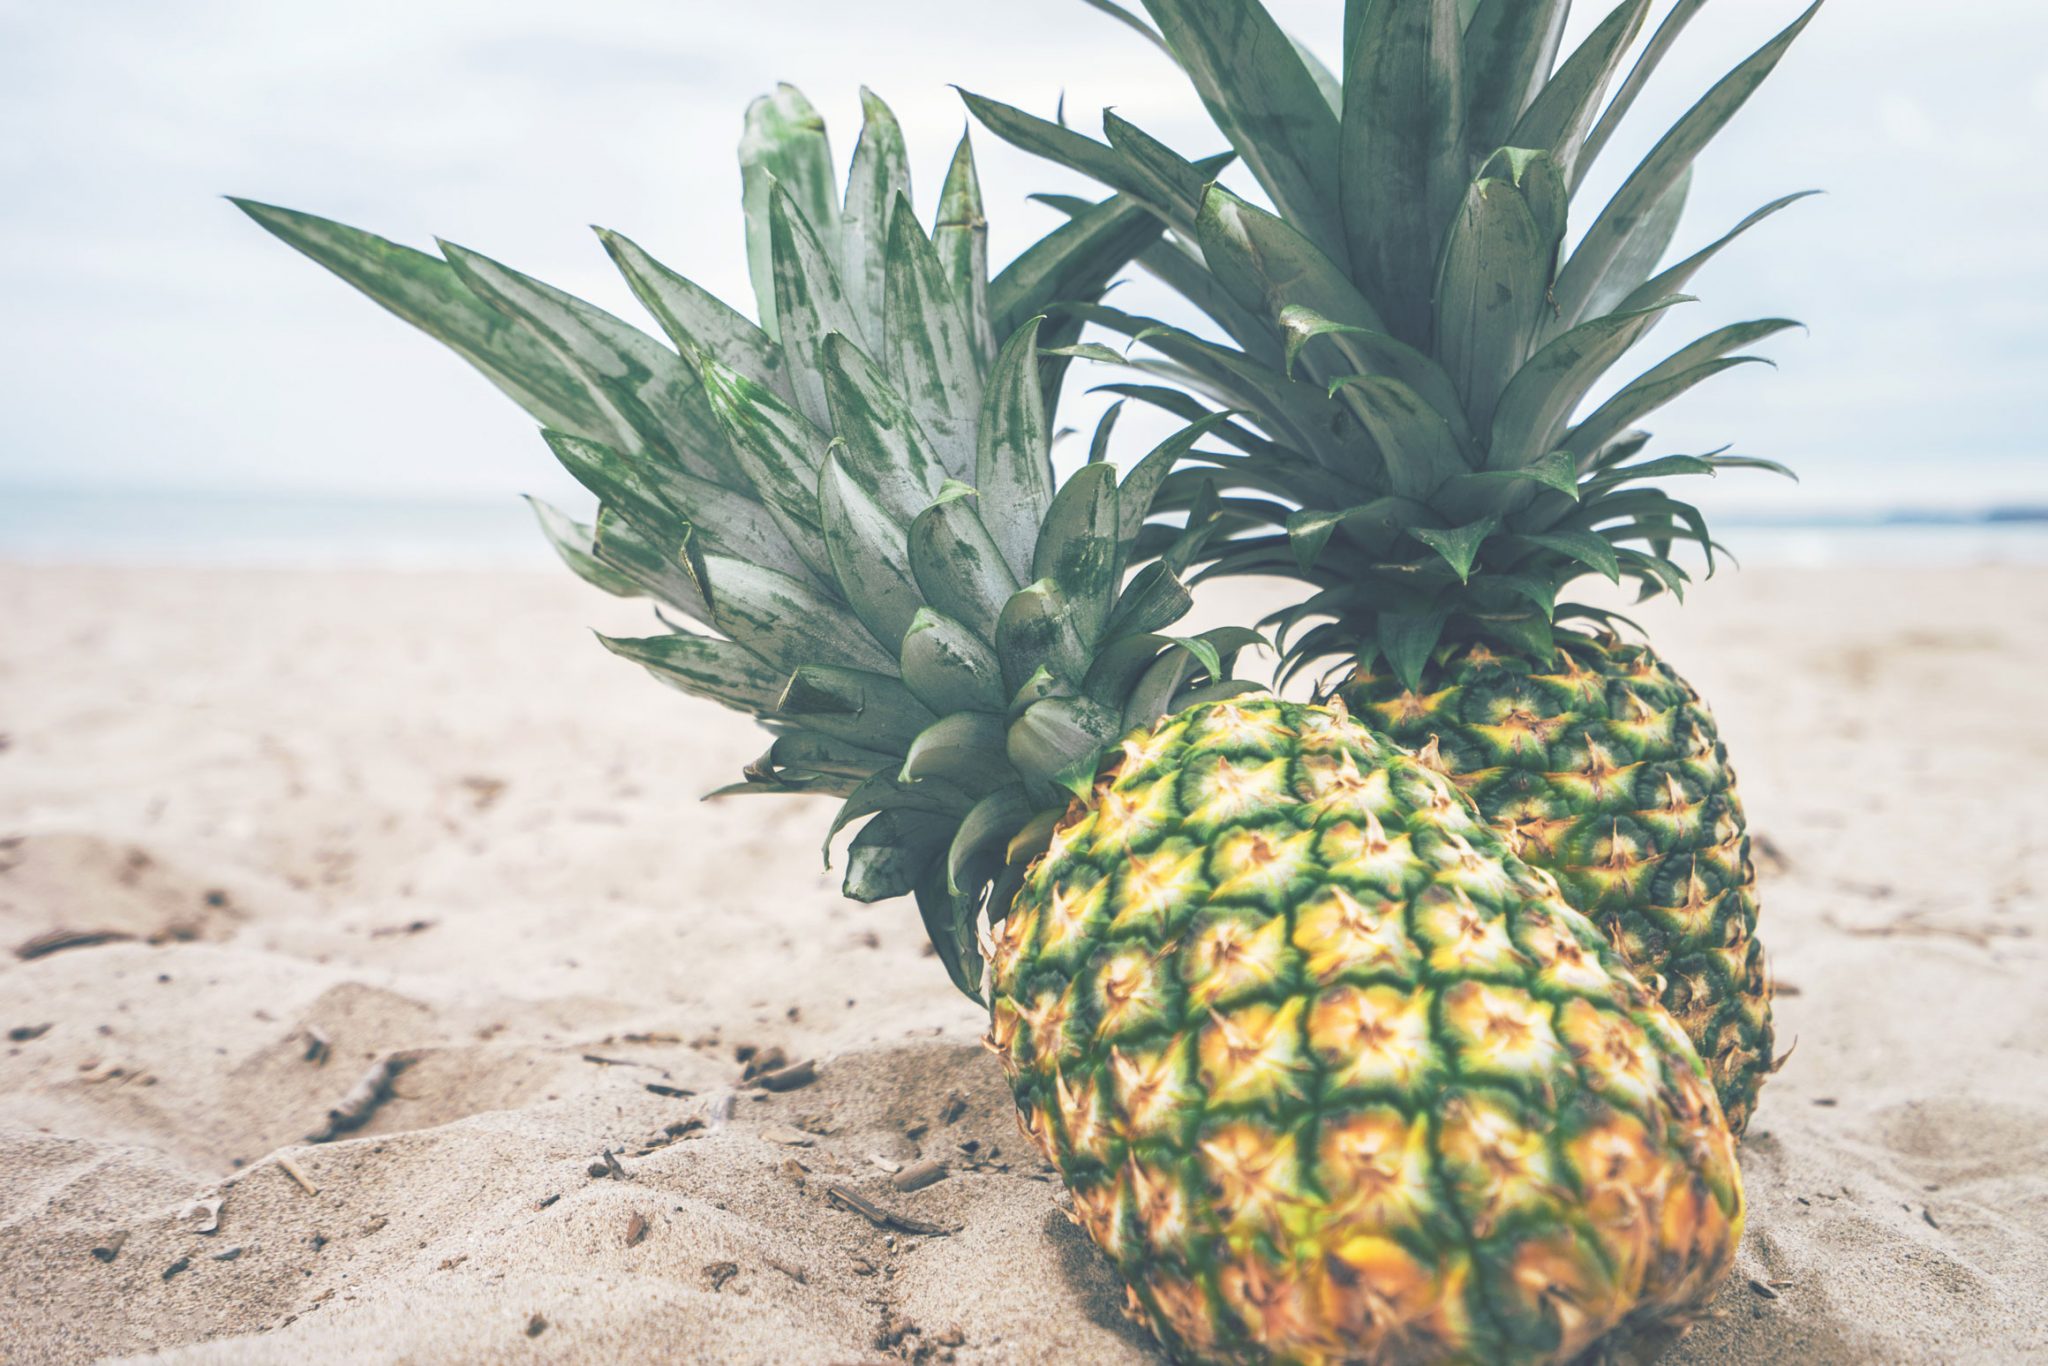 Ananas na plaži; Foto: Pineapple Supply Co. from pexels.com